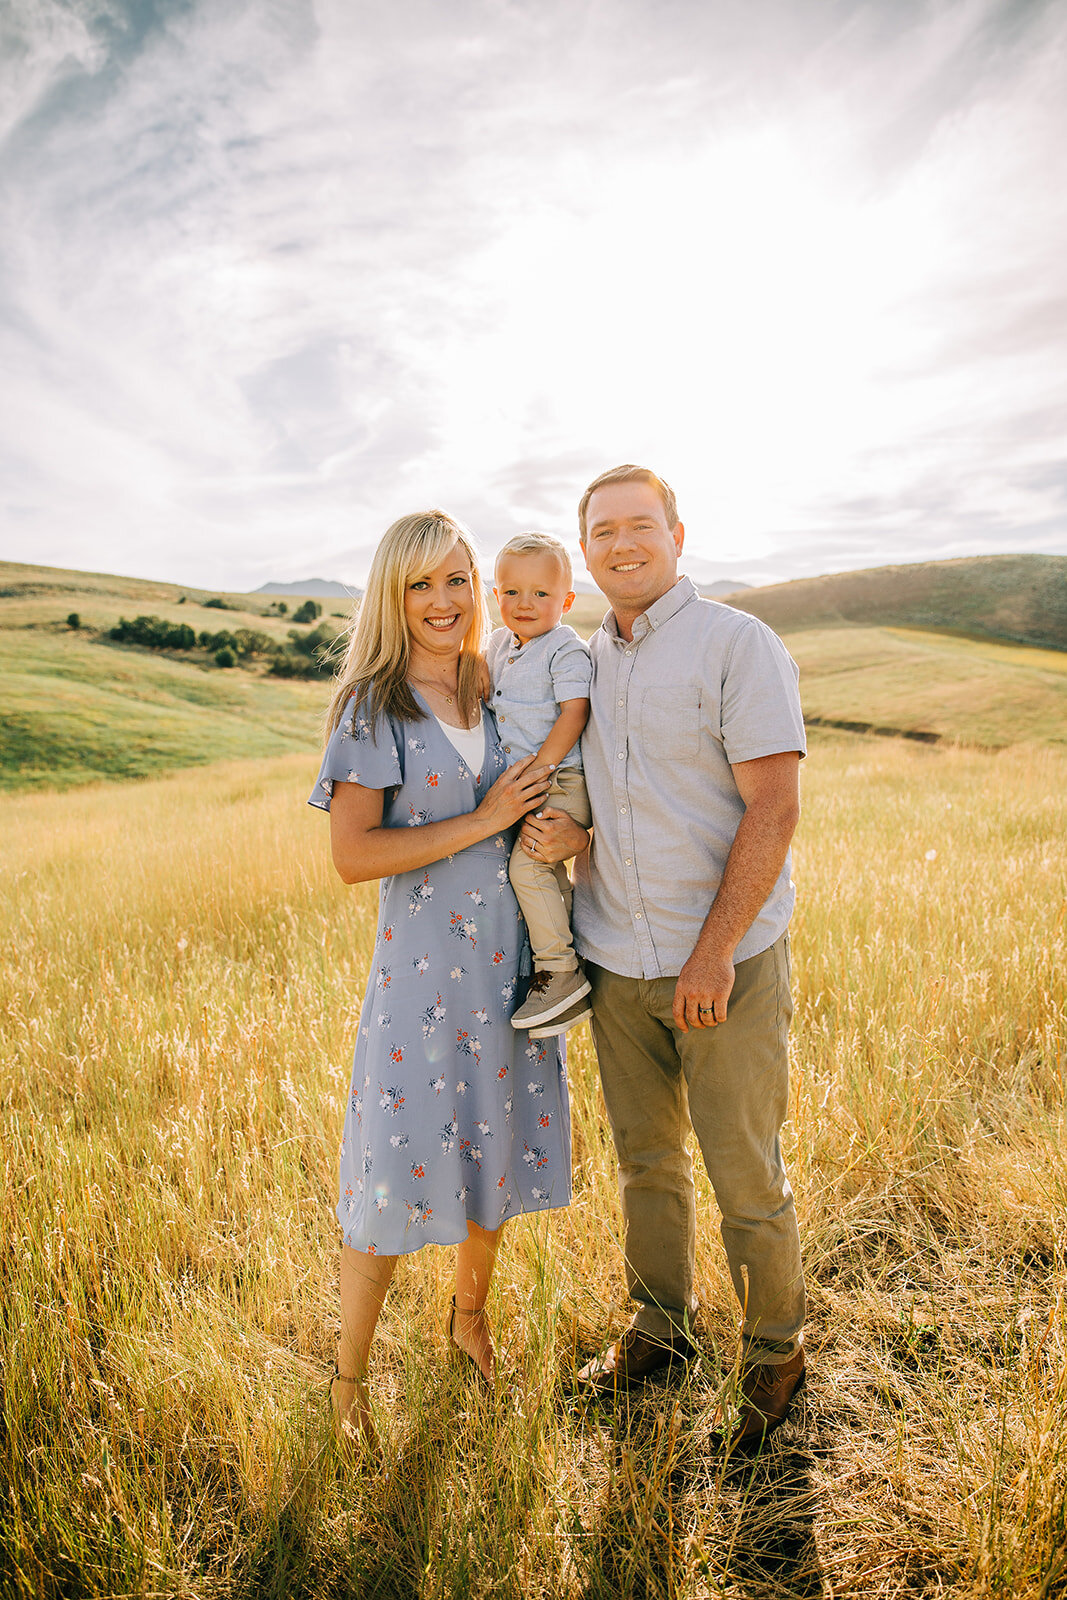  summer family photos blue dress family pictures outfit inspiration yellow fields sunset family picture setting location beautiful paradise utah hyrum utah family photographer bella alder photography cache valley utah family of three posing together 